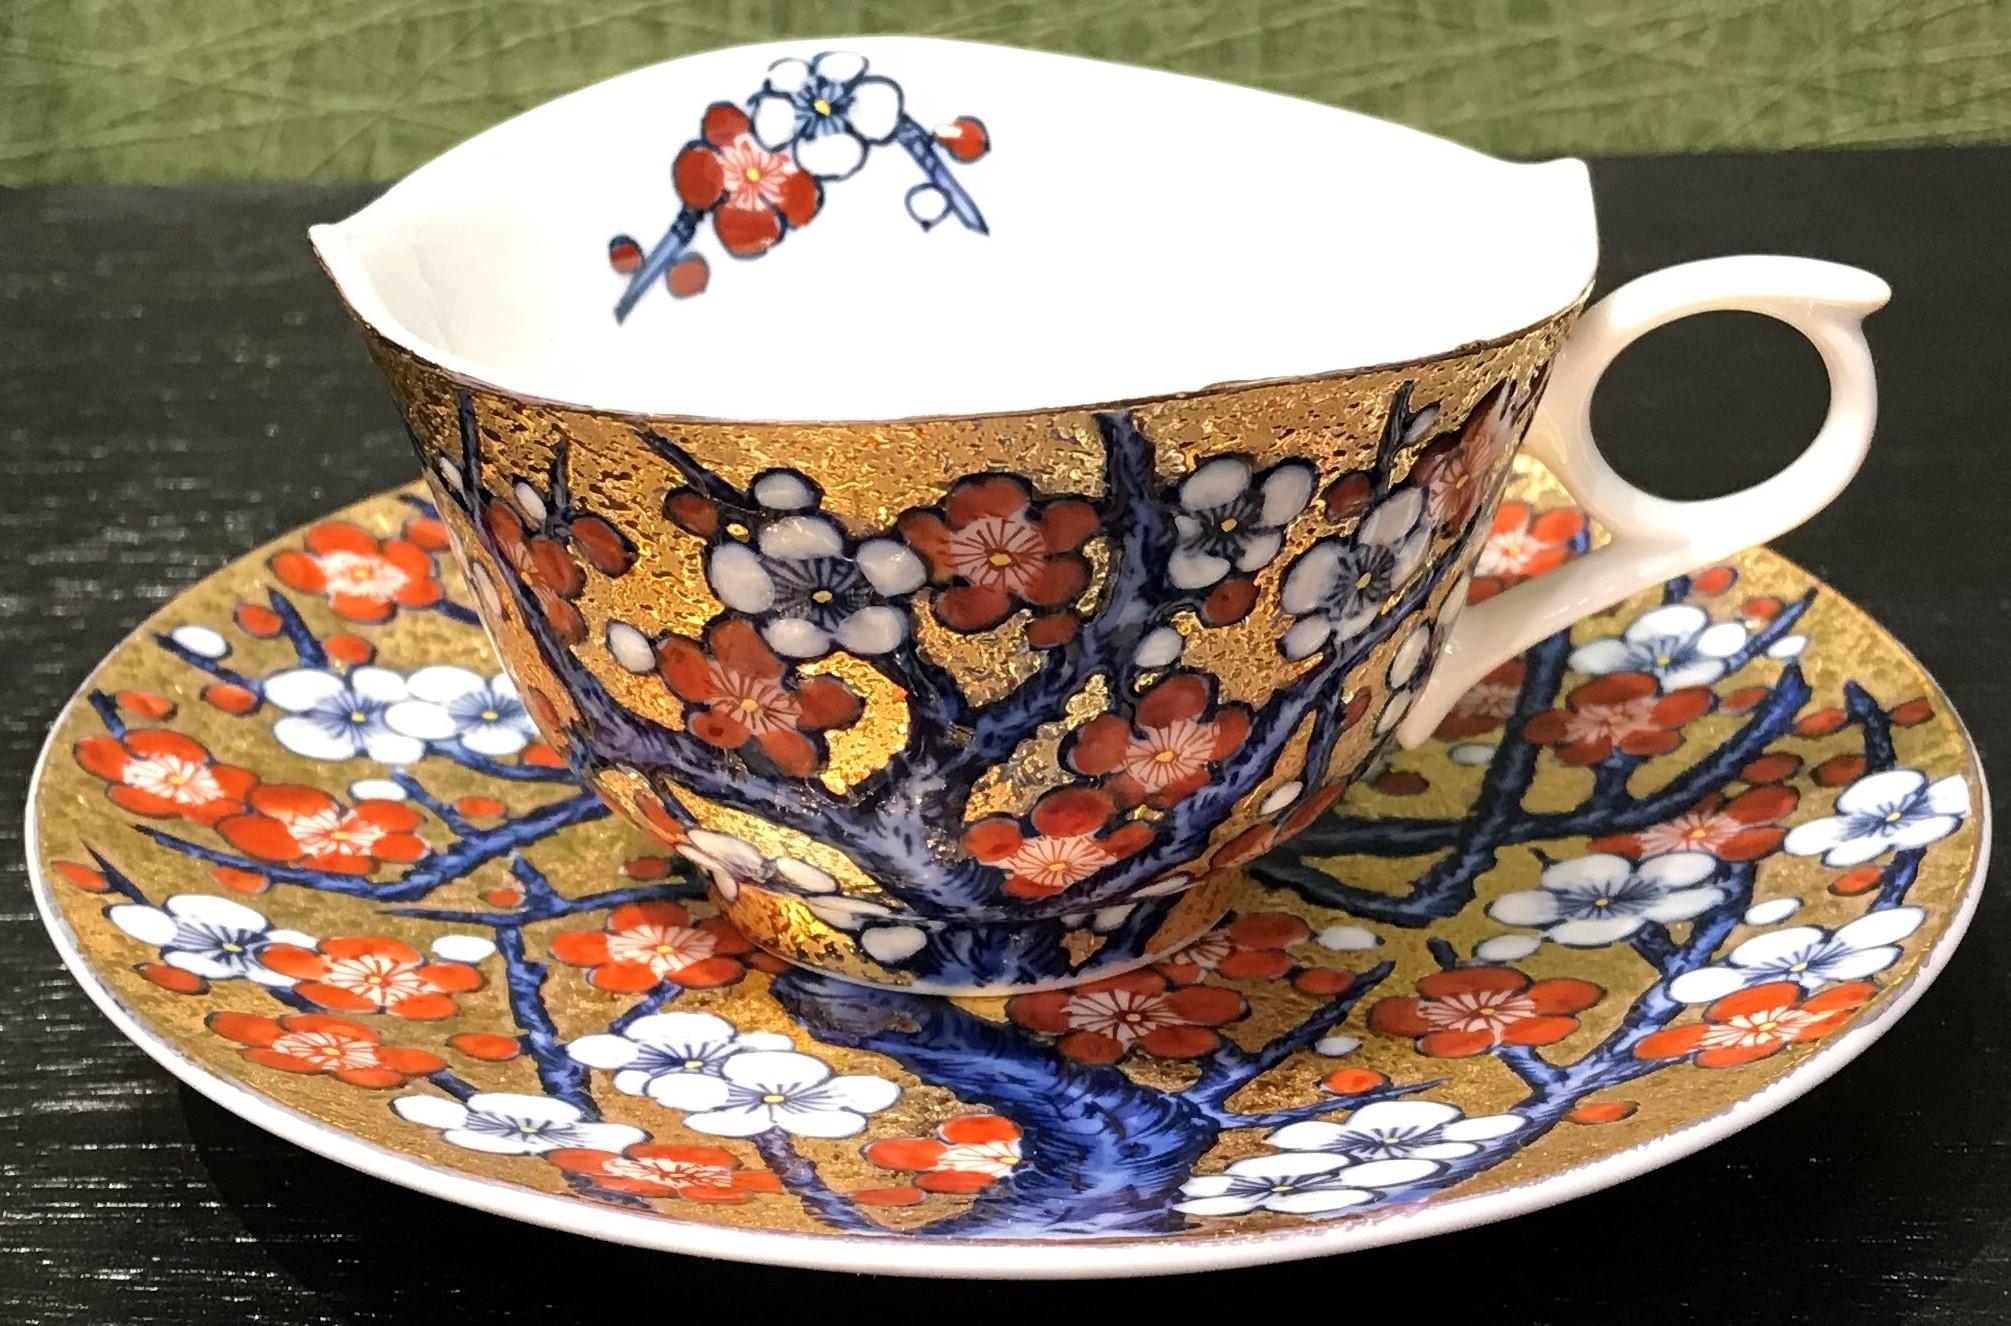 Unique contemporary gilded Japanese fine porcelain cup and saucer, intricately hand painted in vivid blue, red and white on an attractive gilded body, featuring stunning plum blossoms in full bloom.
This cup and saucer is from a signature series by